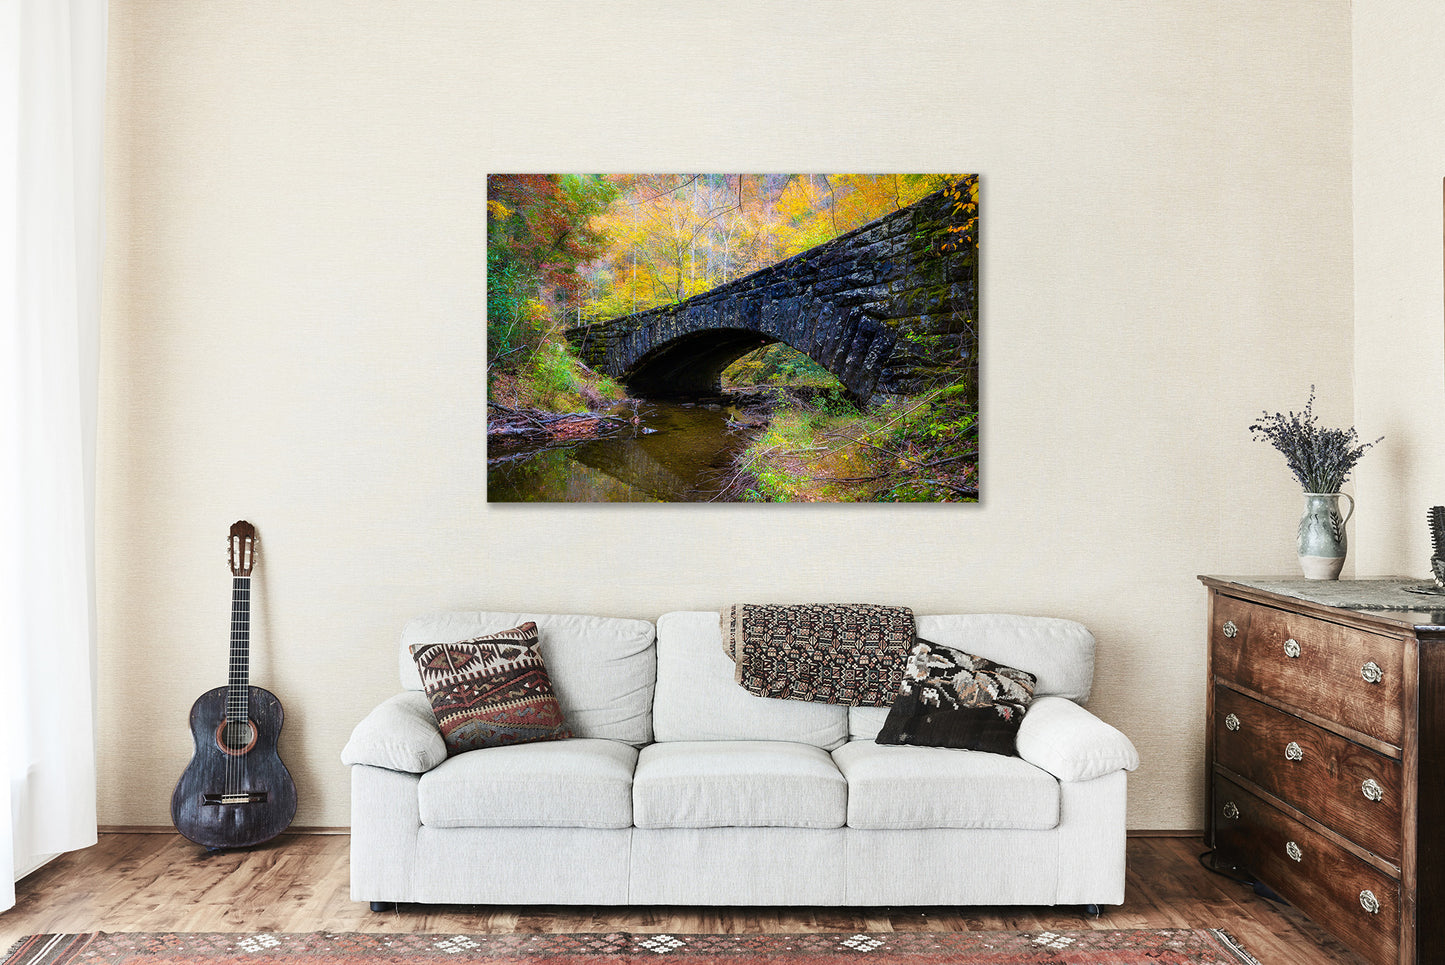 Country Canvas Wall Art - Gallery Wrap of Stone Bridge Surrounded by Fall Foliage in Great Smoky Mountains - Photography Artwork Photo Decor